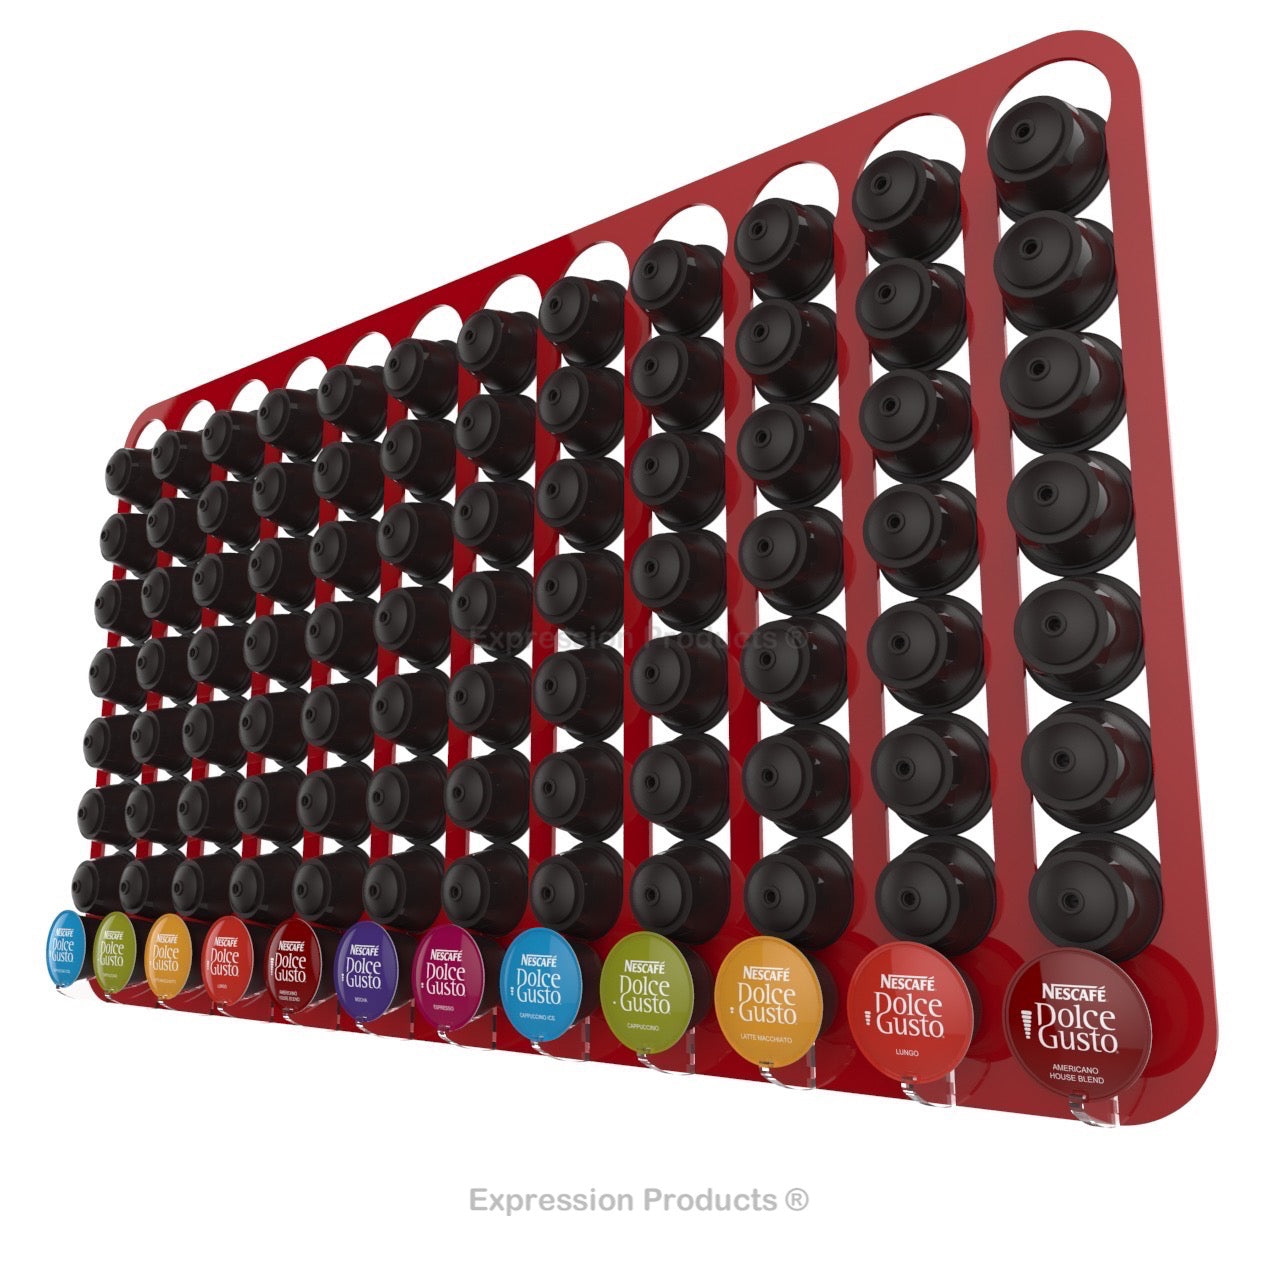 Dolce Gusto Coffee Pod Holder, Wall Mounted.  Shown in Red Holding 96 Pods